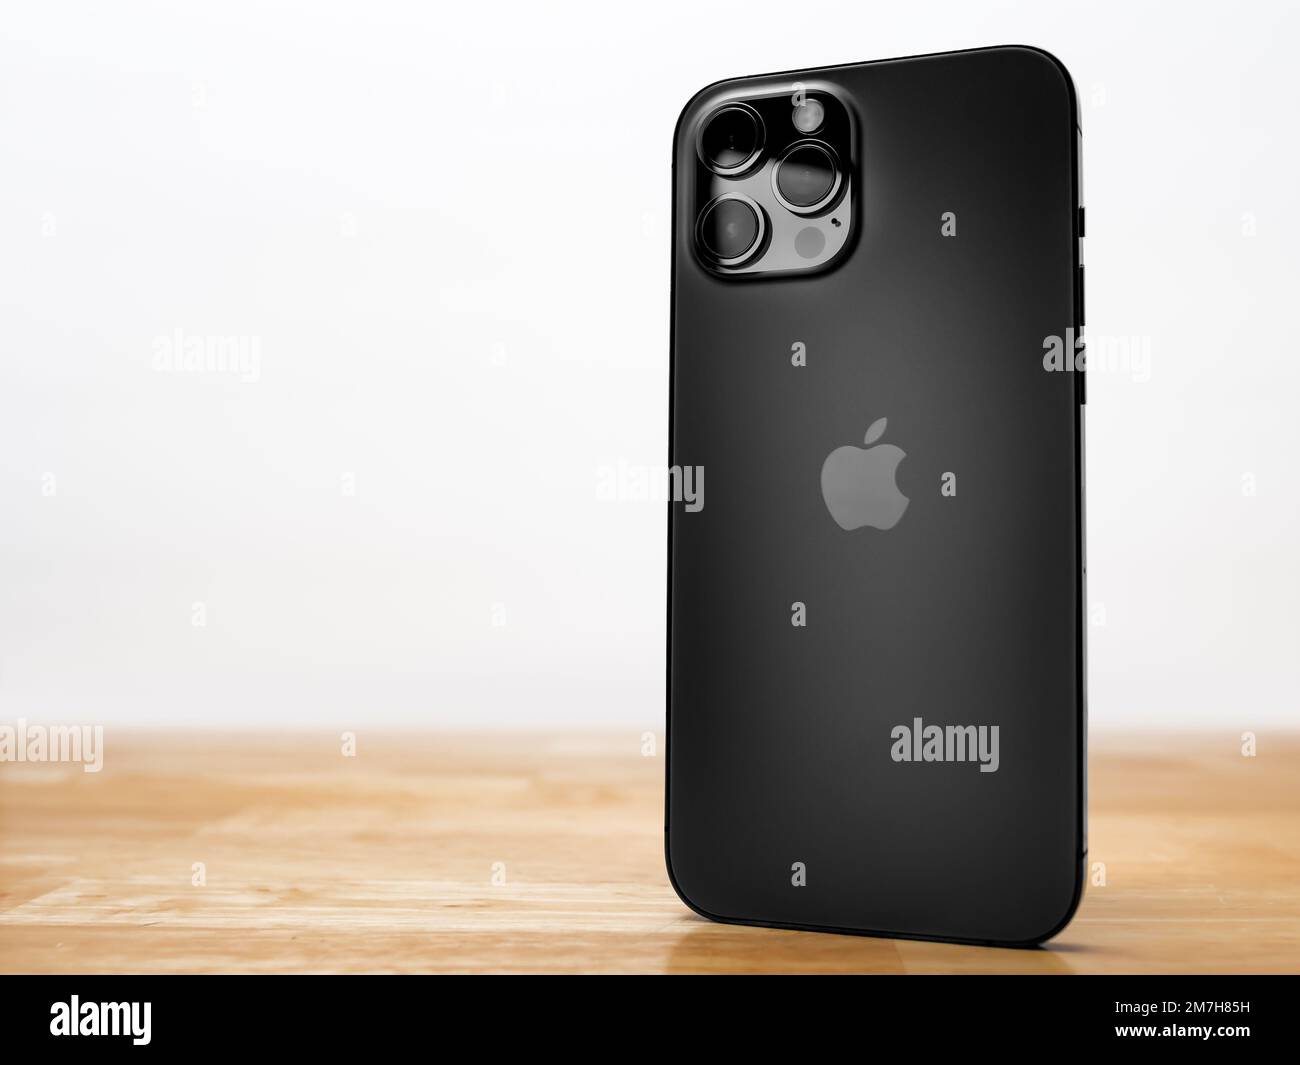 The iPhone 12 Pro Max is Apple’s most advanced and largest 5G cell phone. The phone features 3 rear facing cameras and a LiDAR sensor. Stock Photo